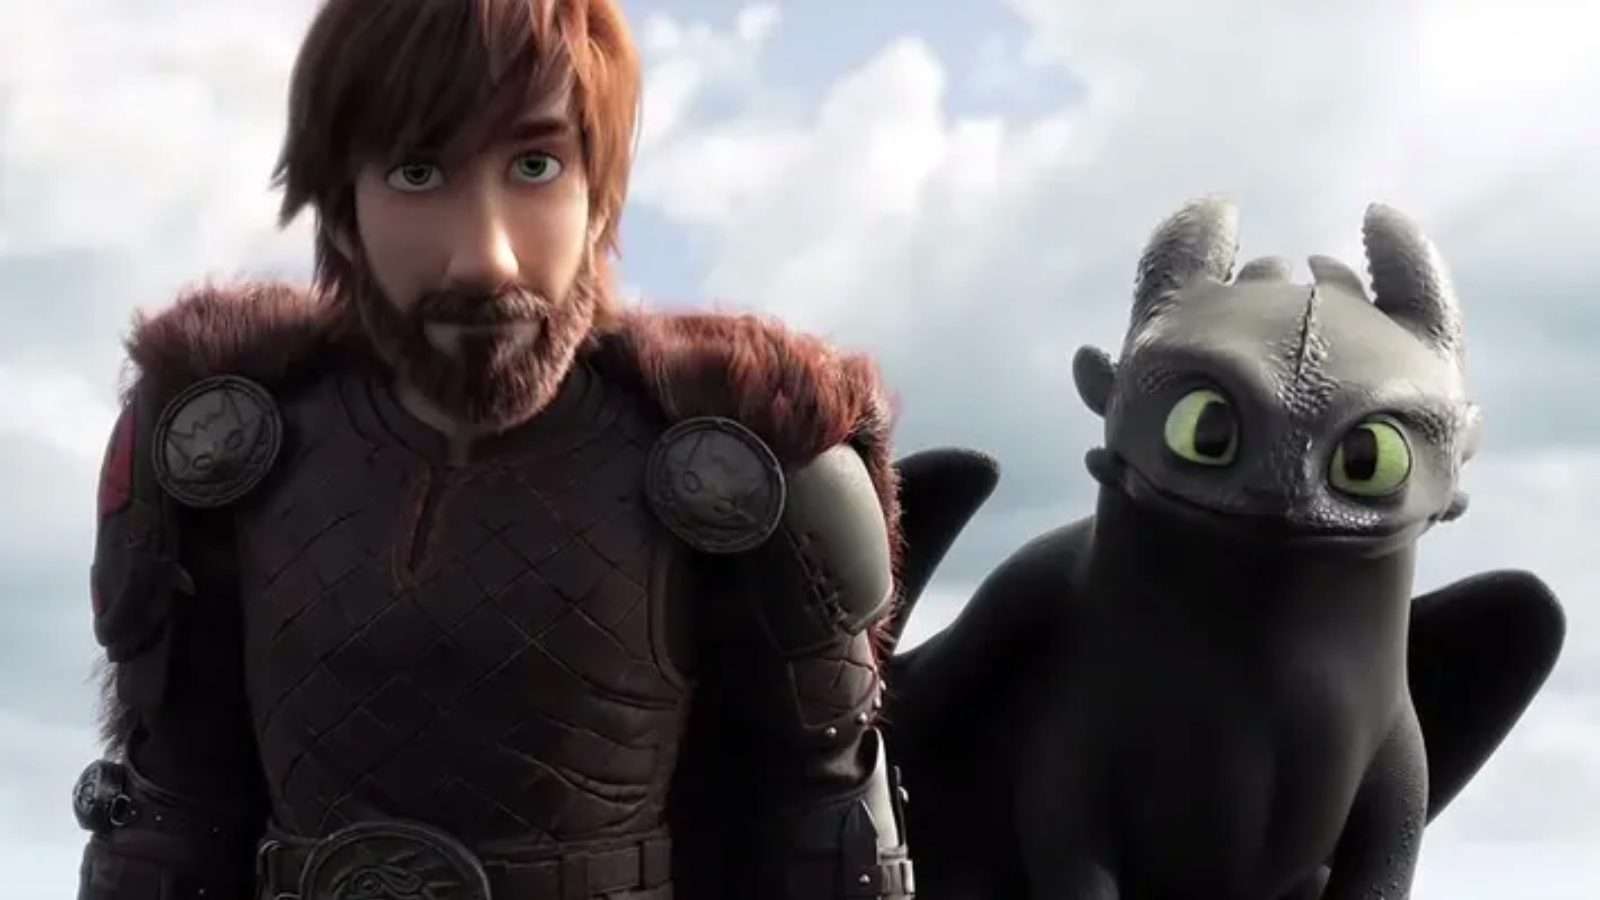 How To Train Your Dragon main characters.